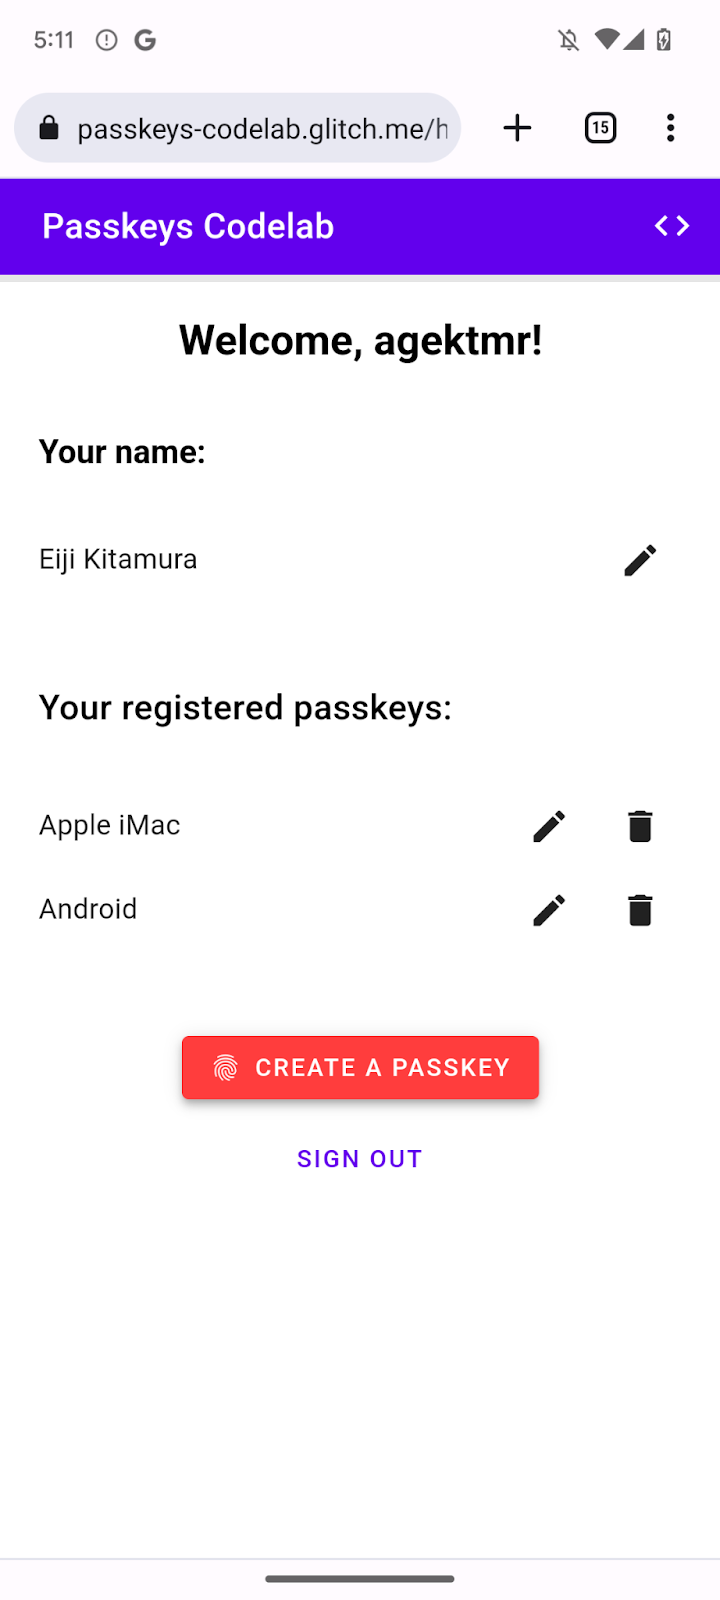 Registered passkeys listed on the /home page